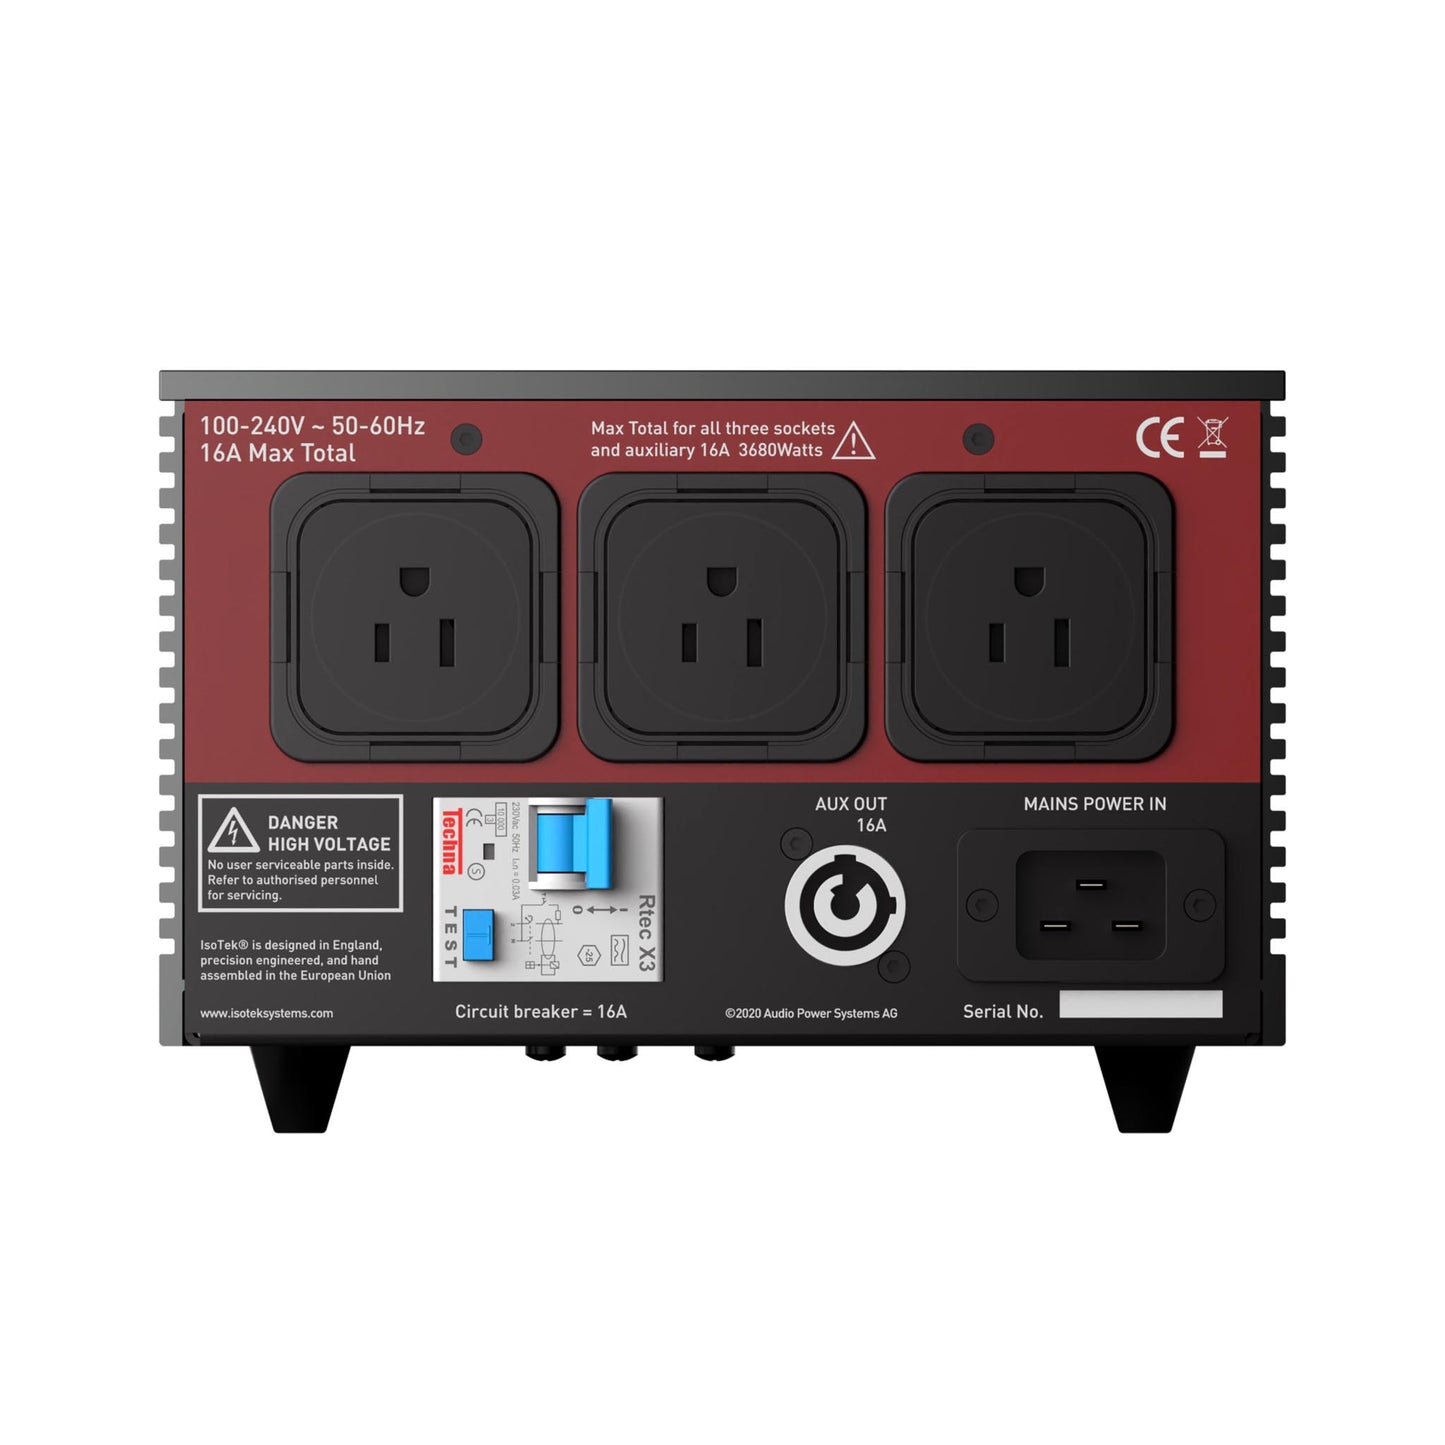 IsoTek V5 Titan Power Conditioner with Premier C19 Power Cable